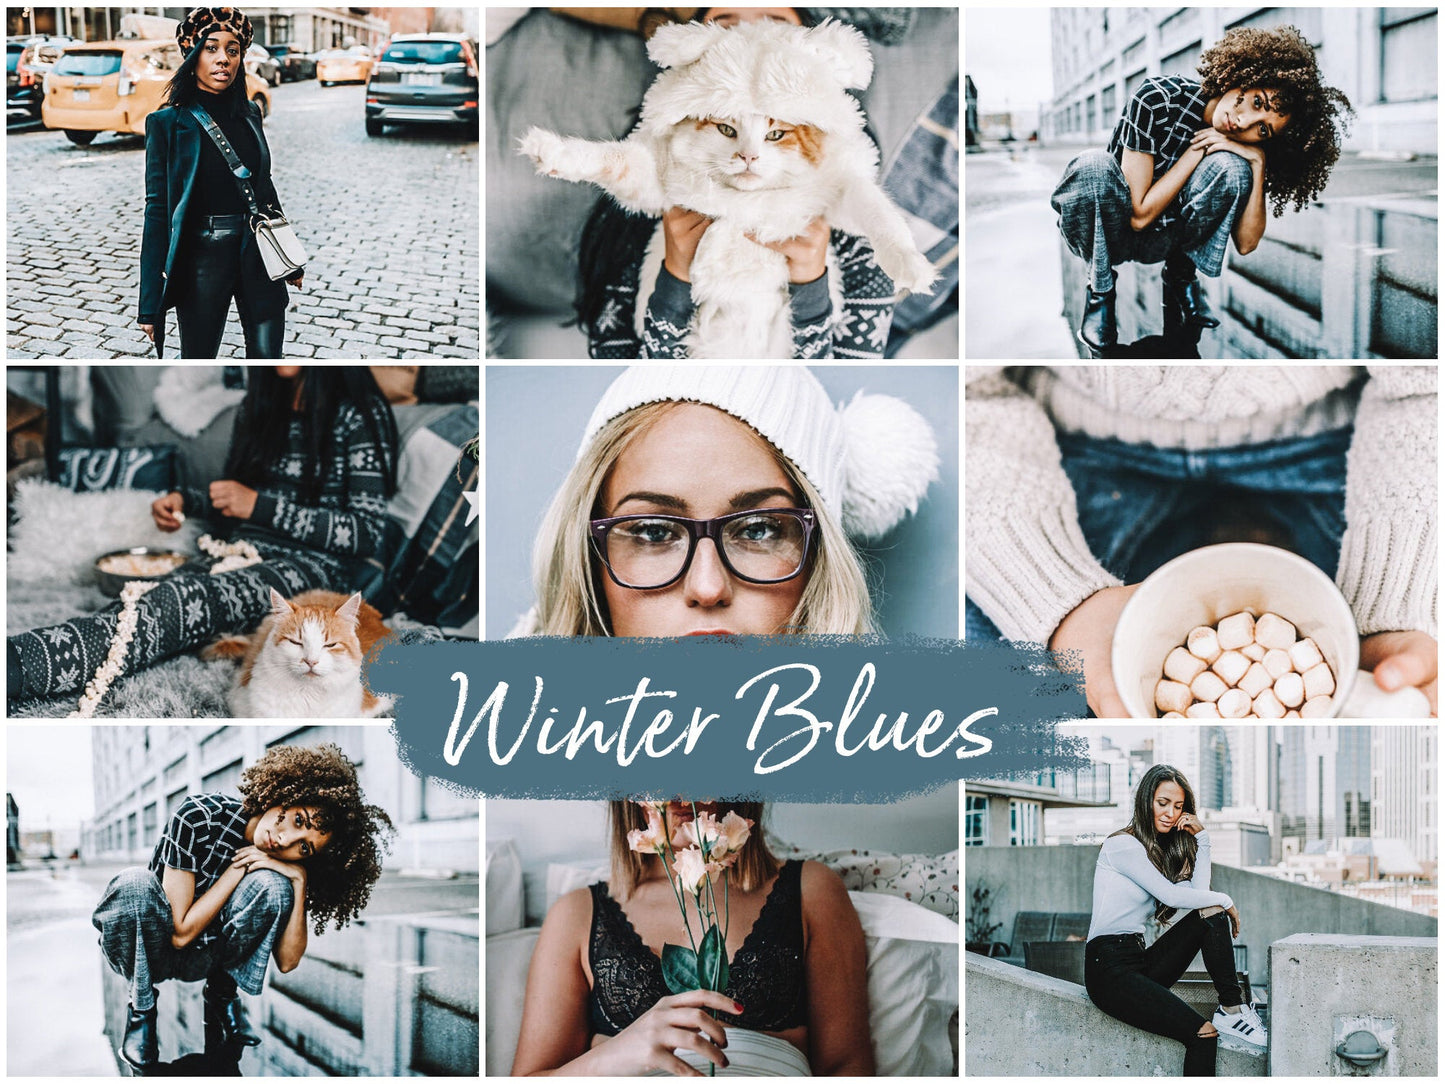 10 Winter Mobile Lightroom Presets Blues, Clean Photo Editing Filter for Lifestyle Blogger, Instagram Influencer Outdoor Preset